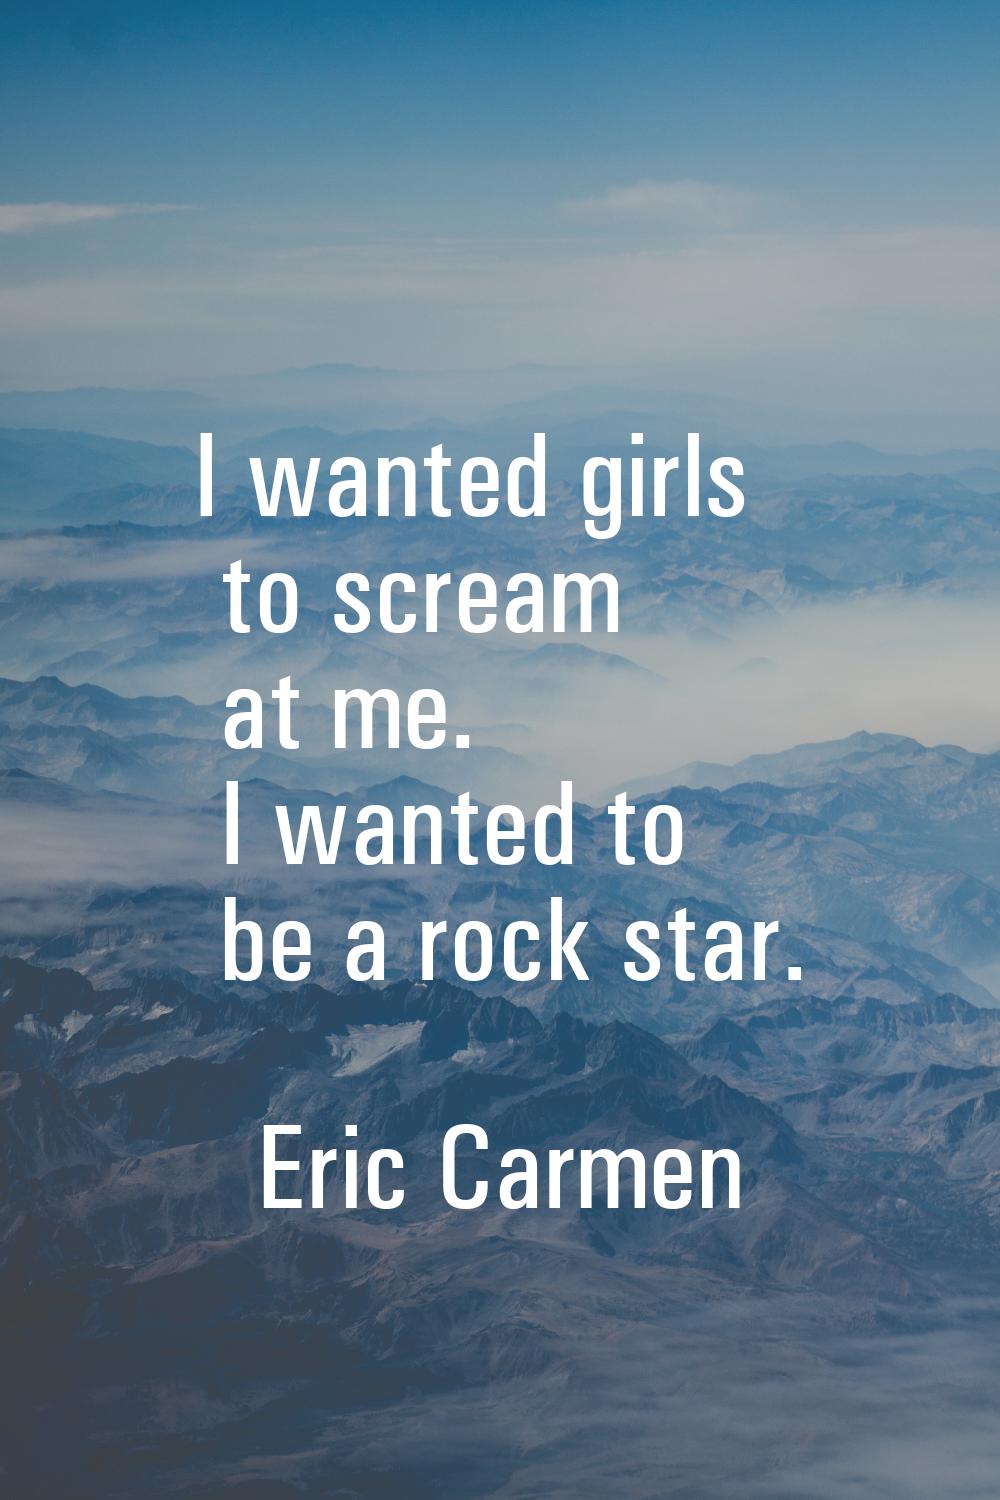 I wanted girls to scream at me. I wanted to be a rock star.